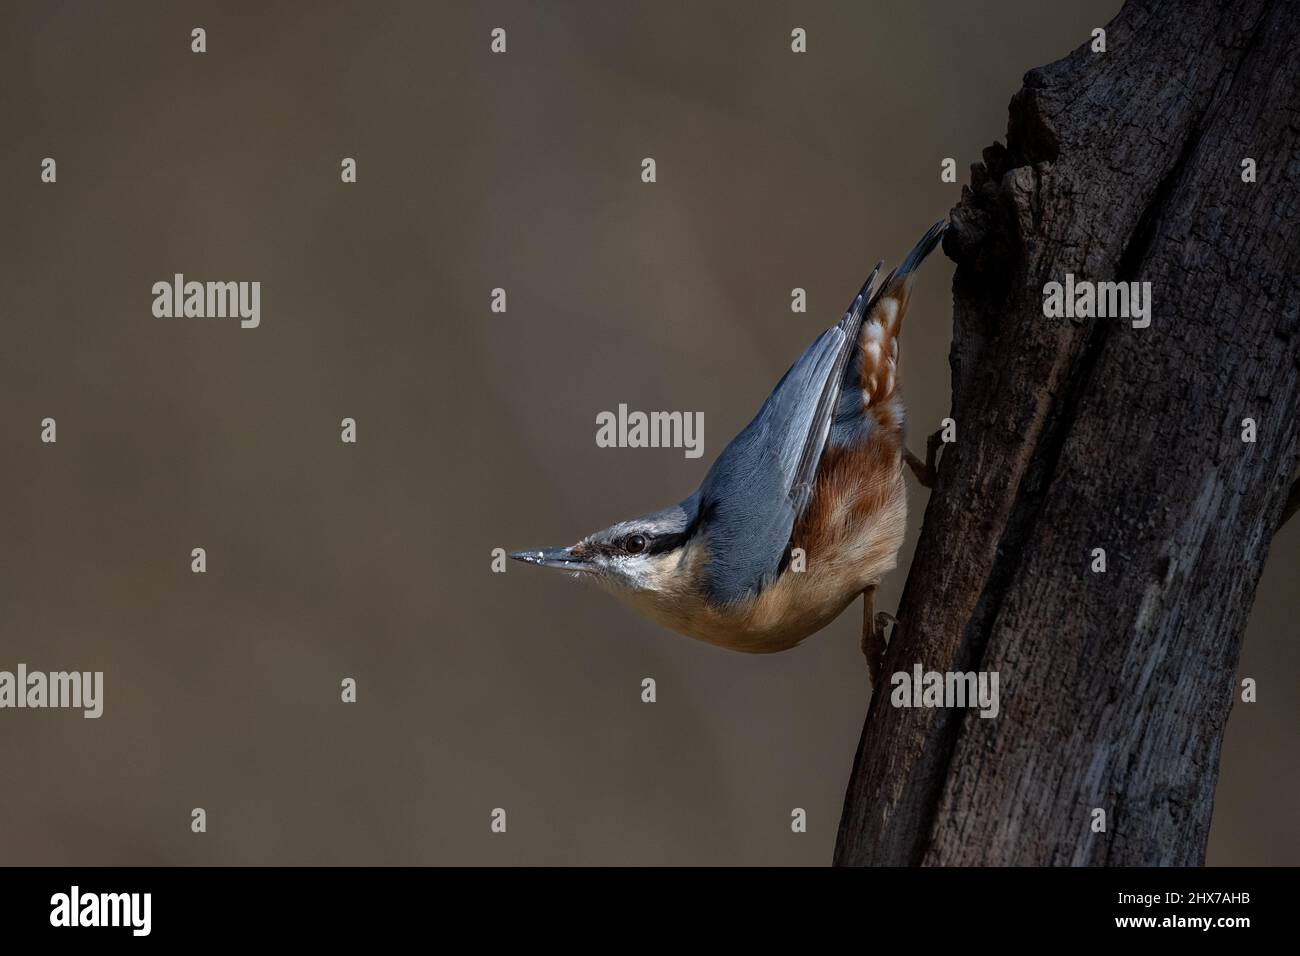 A Eurasian nuthatch (Sitta europaea) strikes a typical downward-facing pose on the branch of a tree Stock Photo